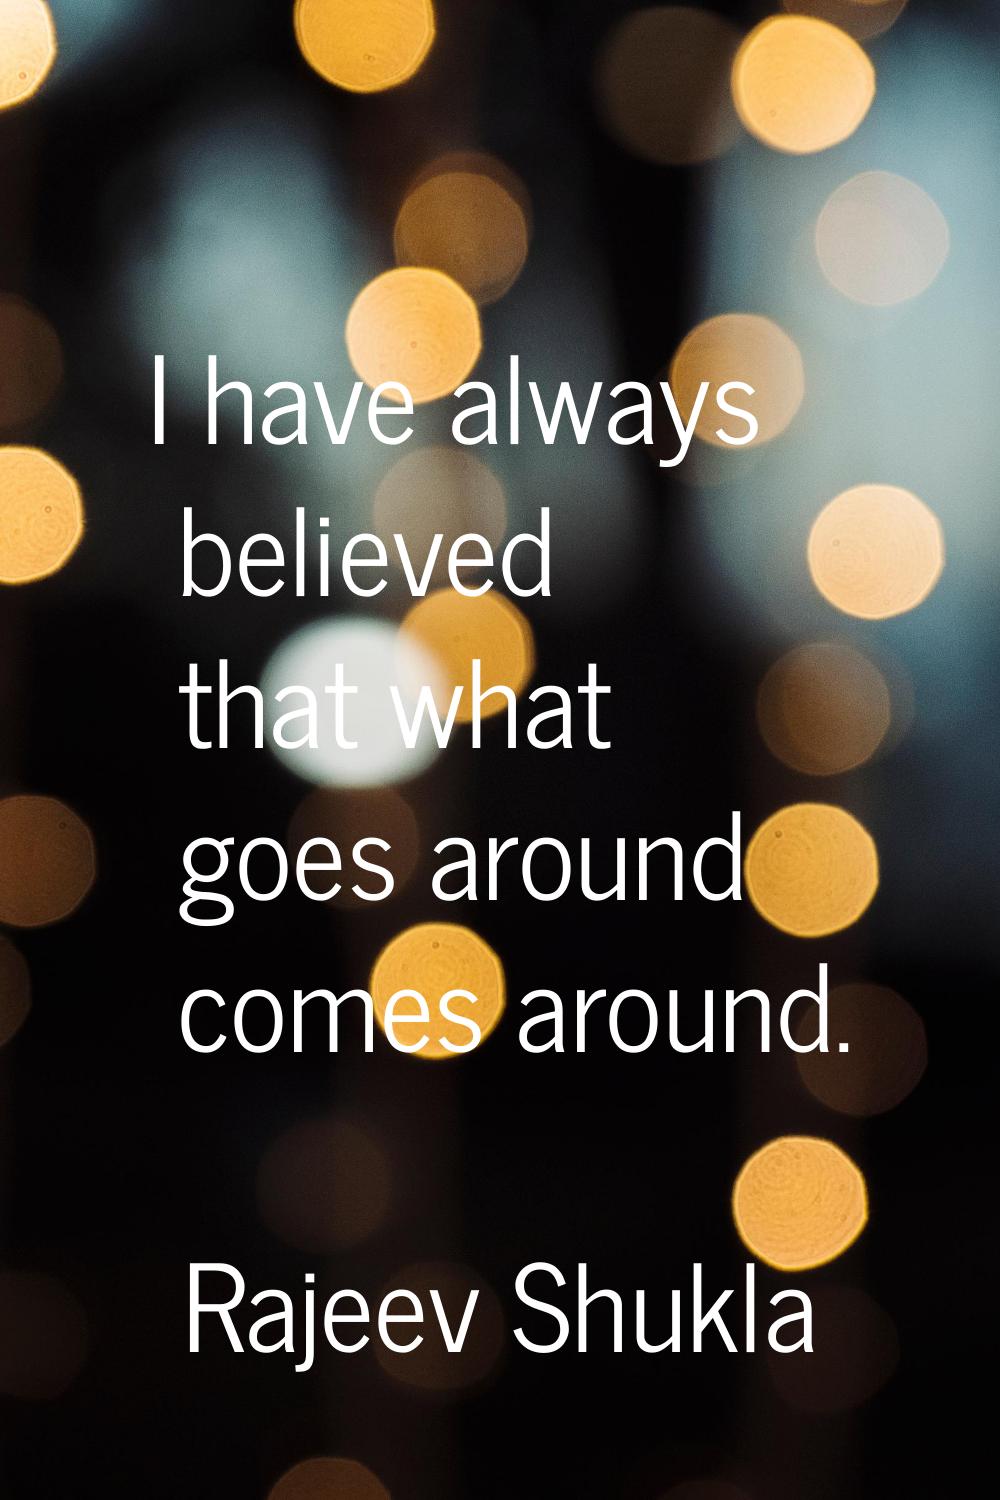 I have always believed that what goes around comes around.